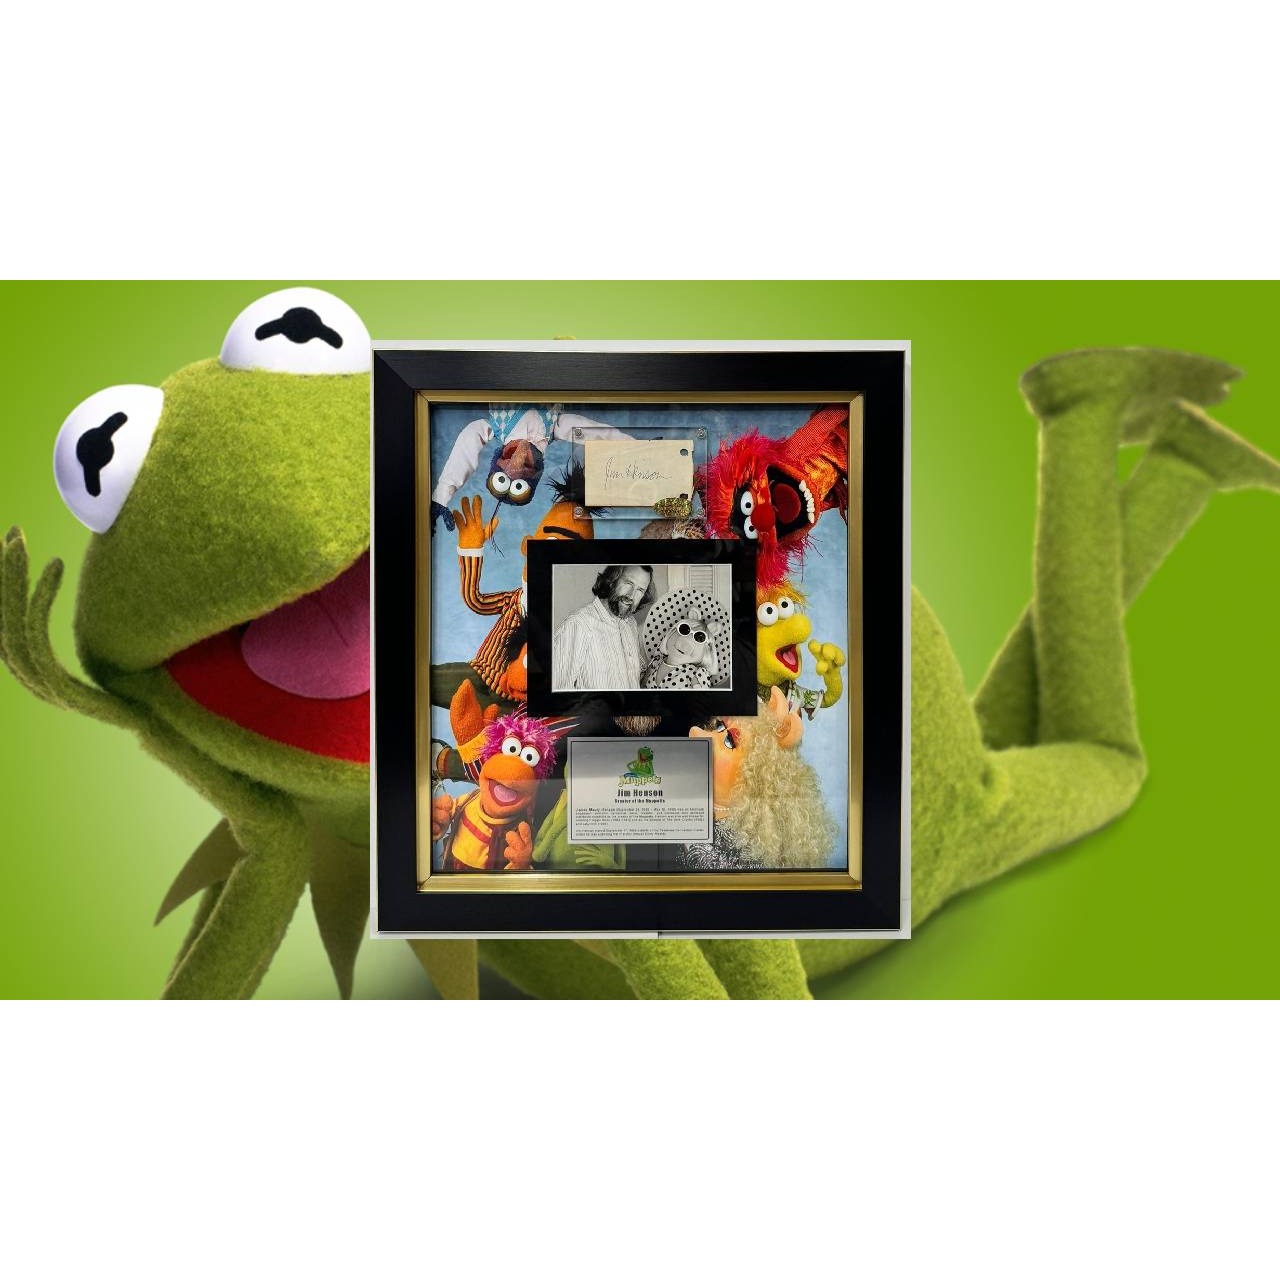 Jim Henson Muppets Miss Piggy creator signed note card with Museum quality frame 19x21 inches